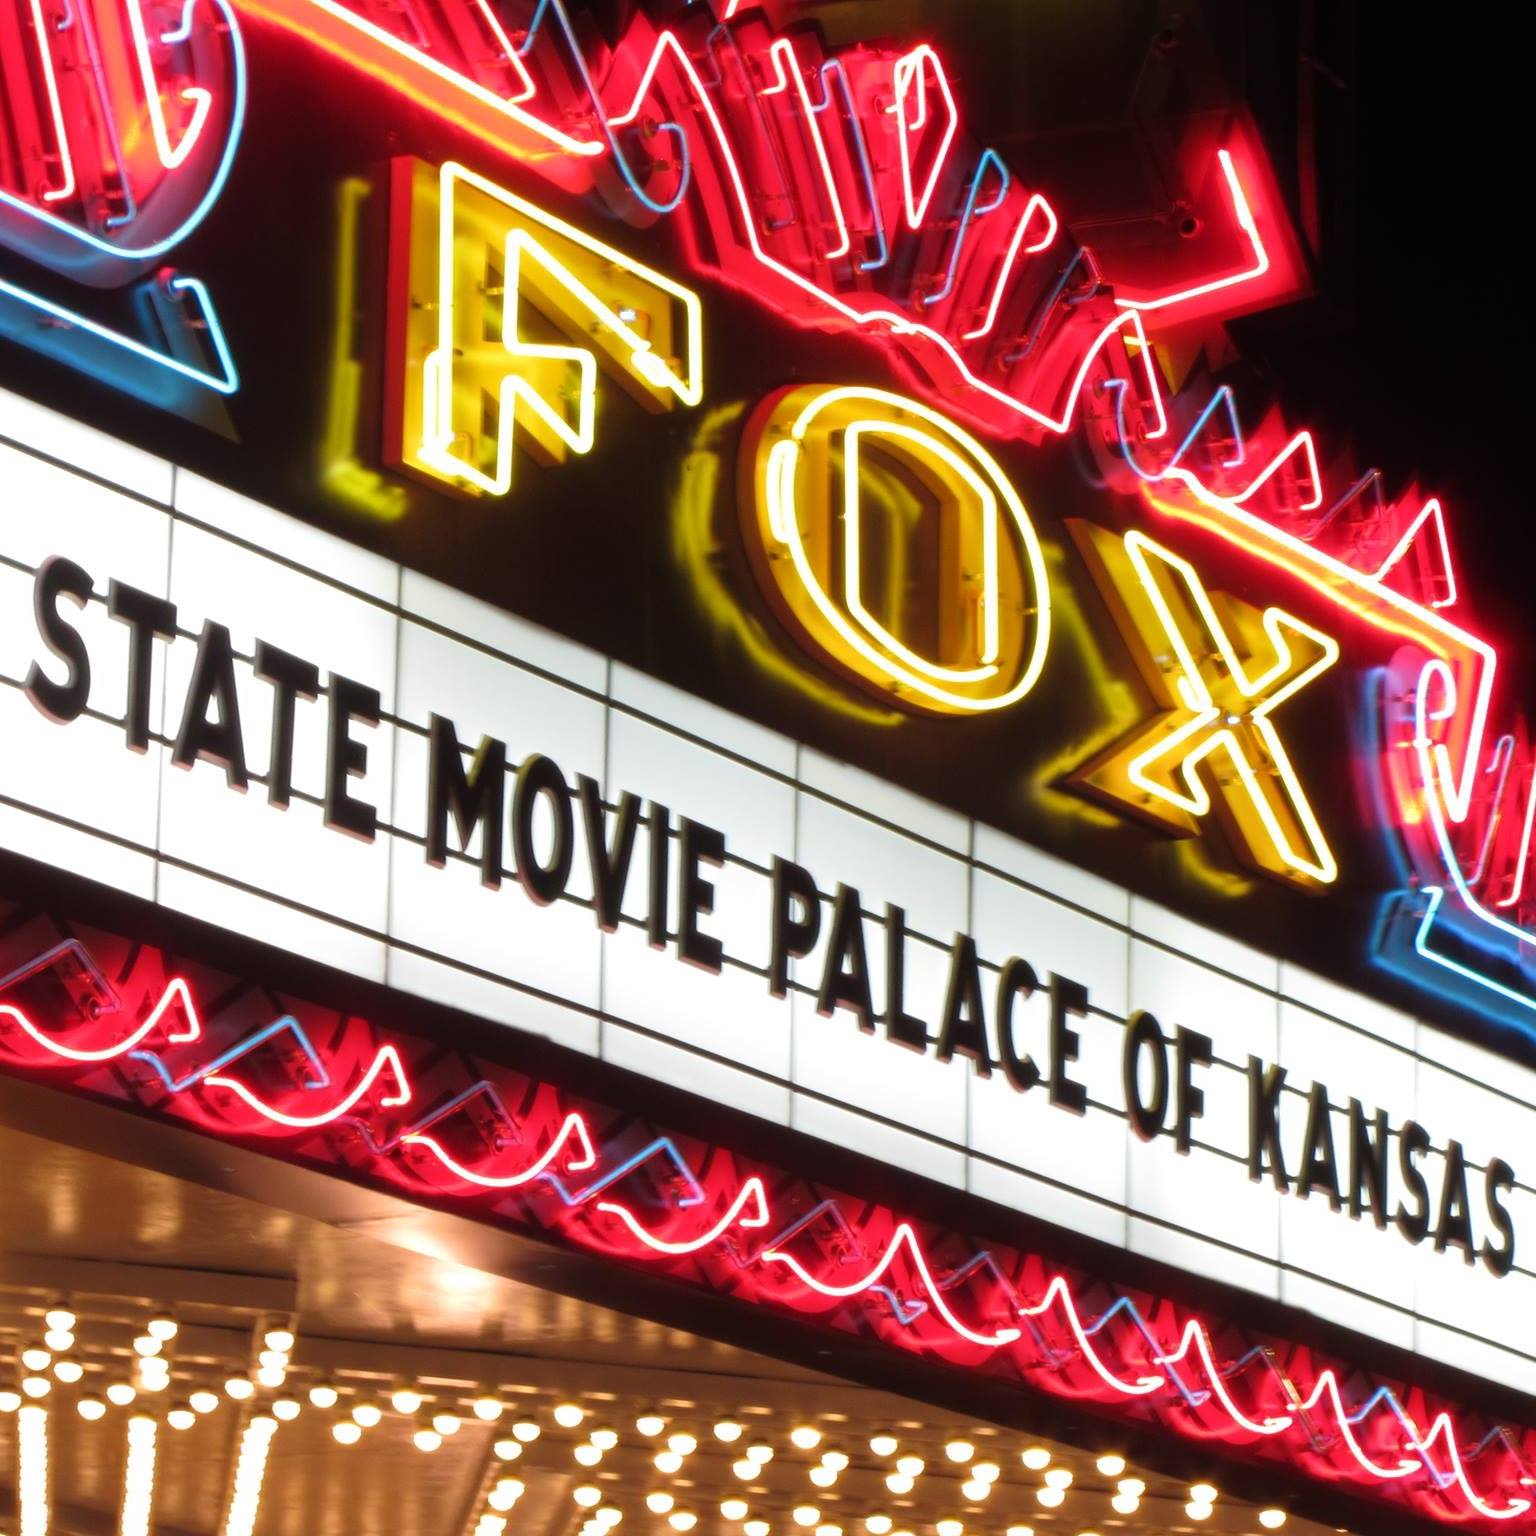 Summer Fox Classic Film Series expands to 16 movies, multiple showtimes